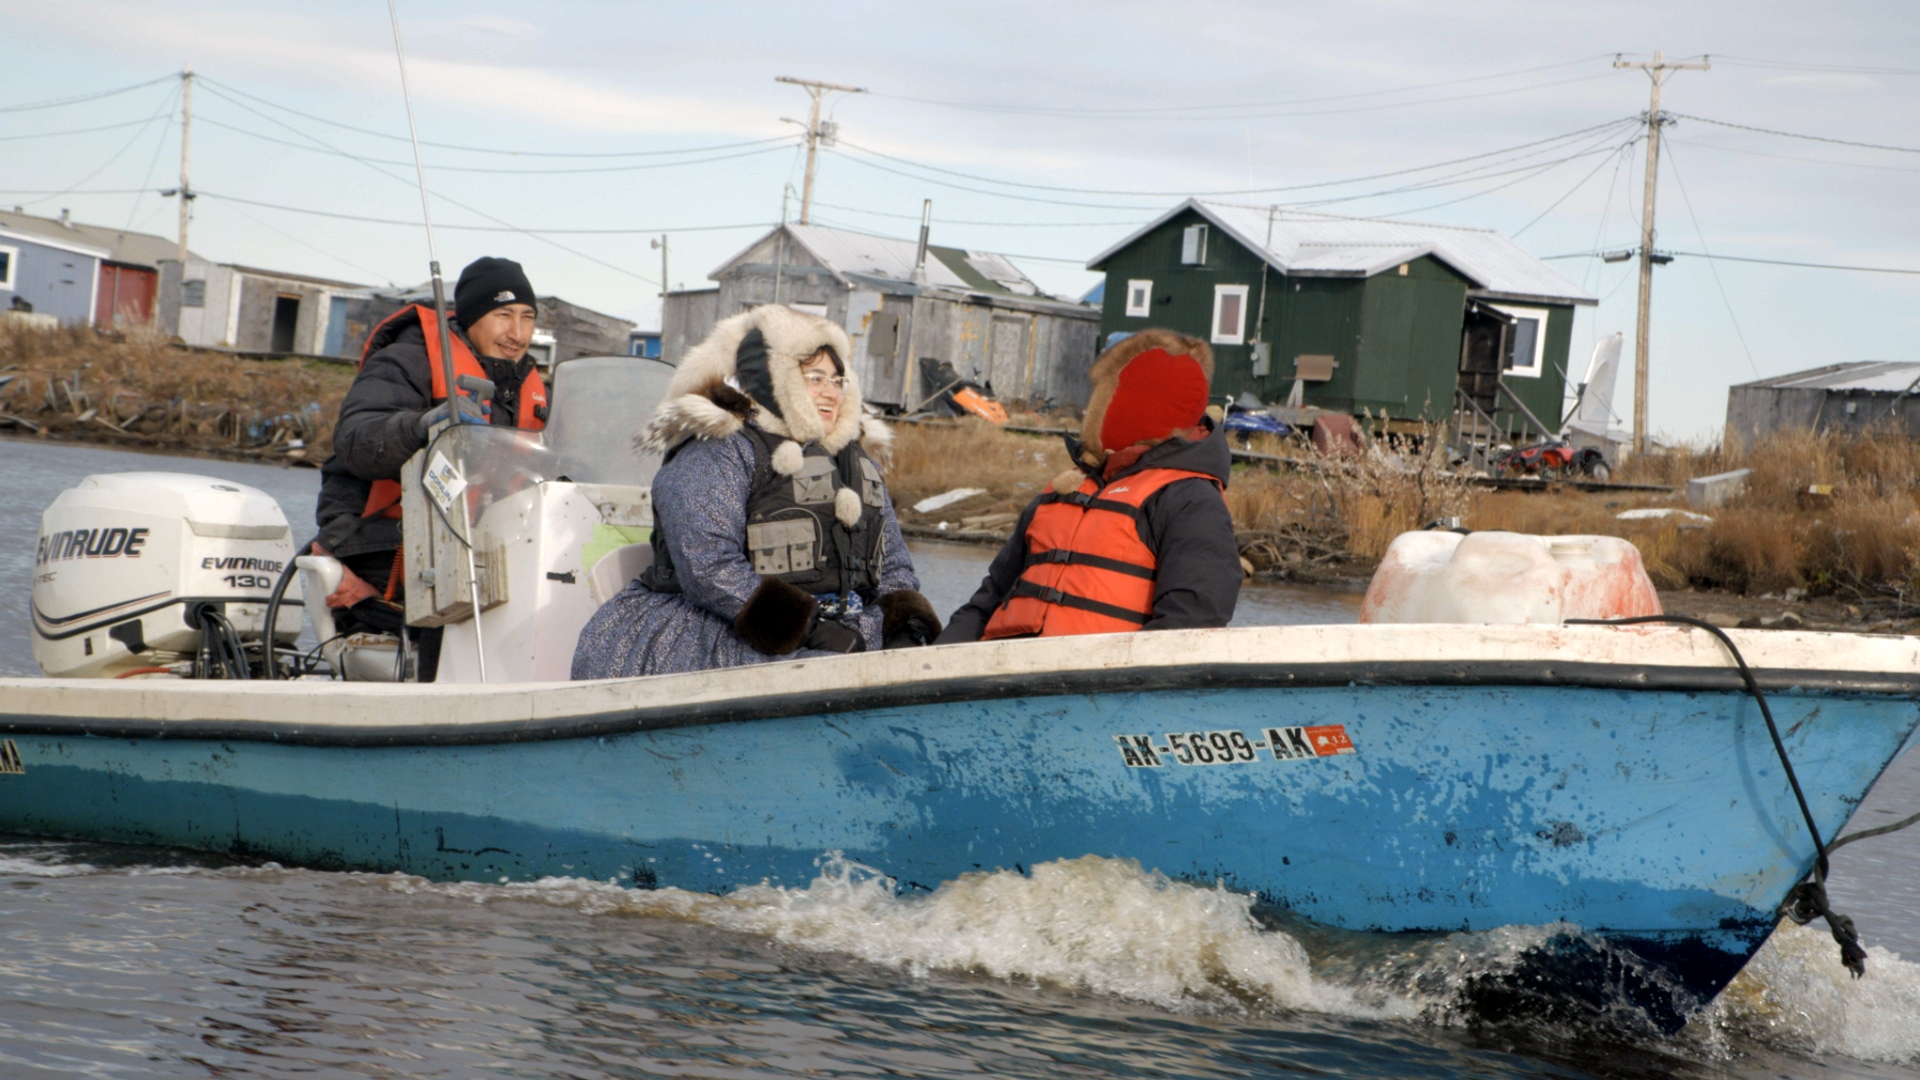 Three people in a small motorboat dressed in parkas and life-vests